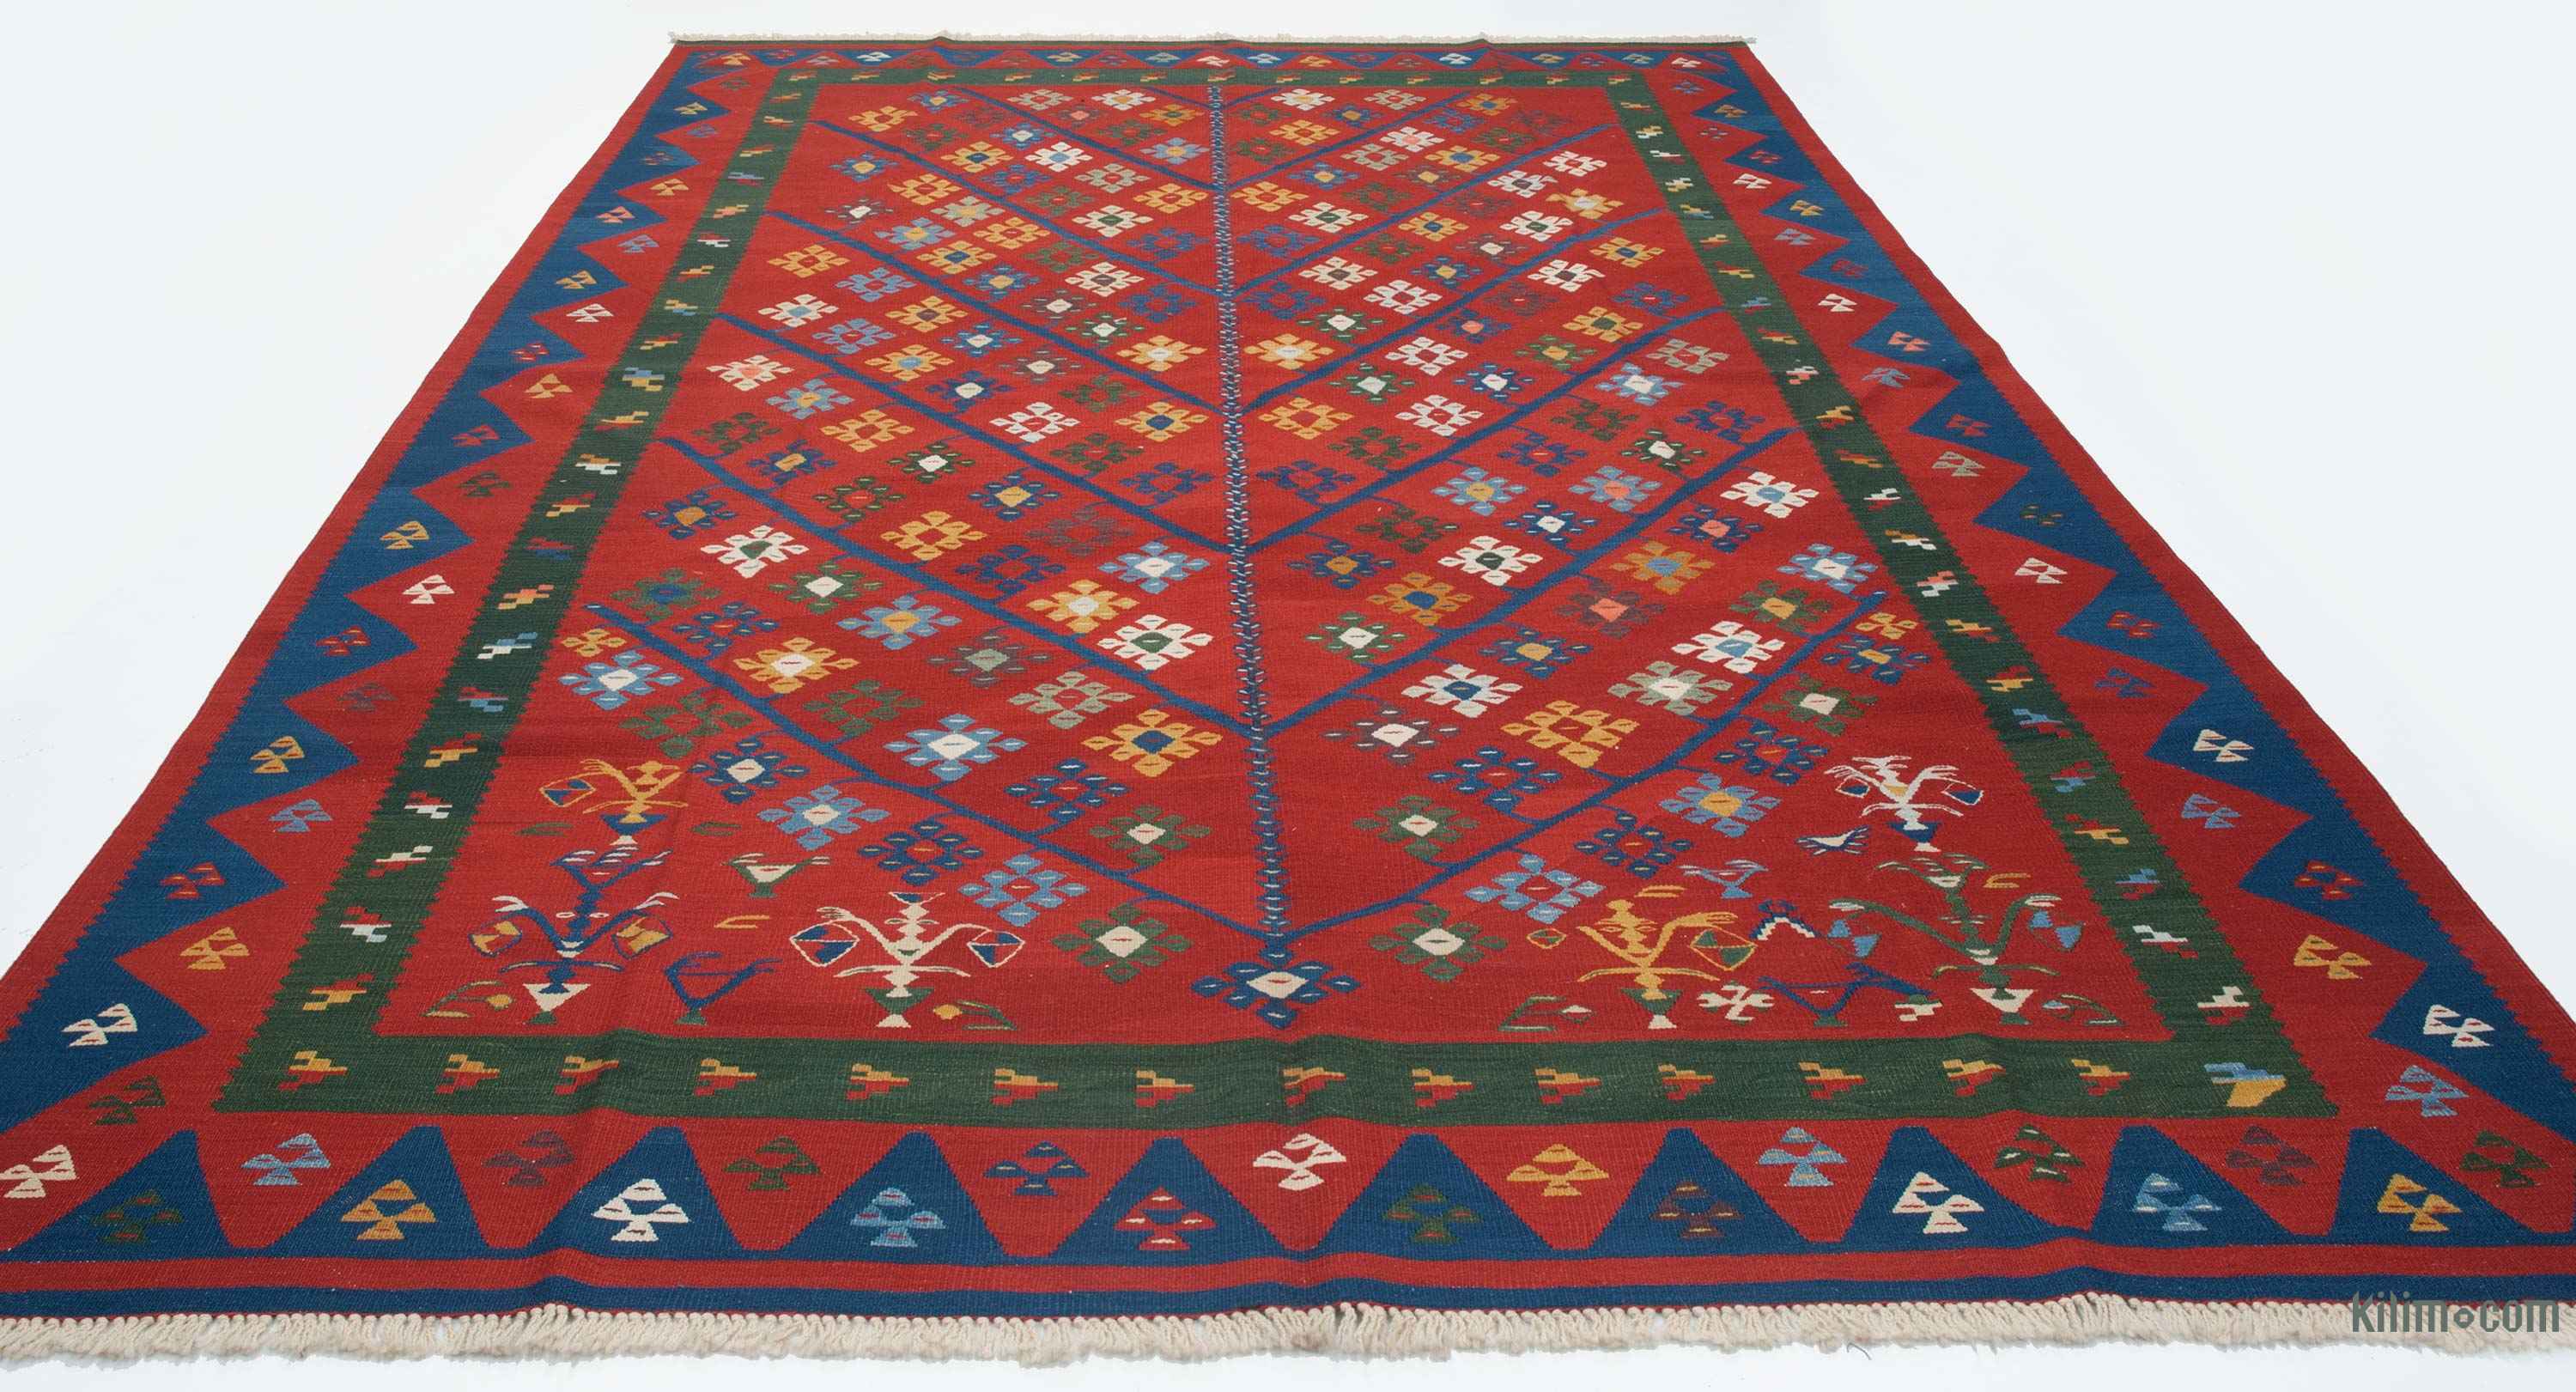 K0027667 Red New Handwoven Turkish Kilim Rug - 8' x 11'7" (96 in. x 139